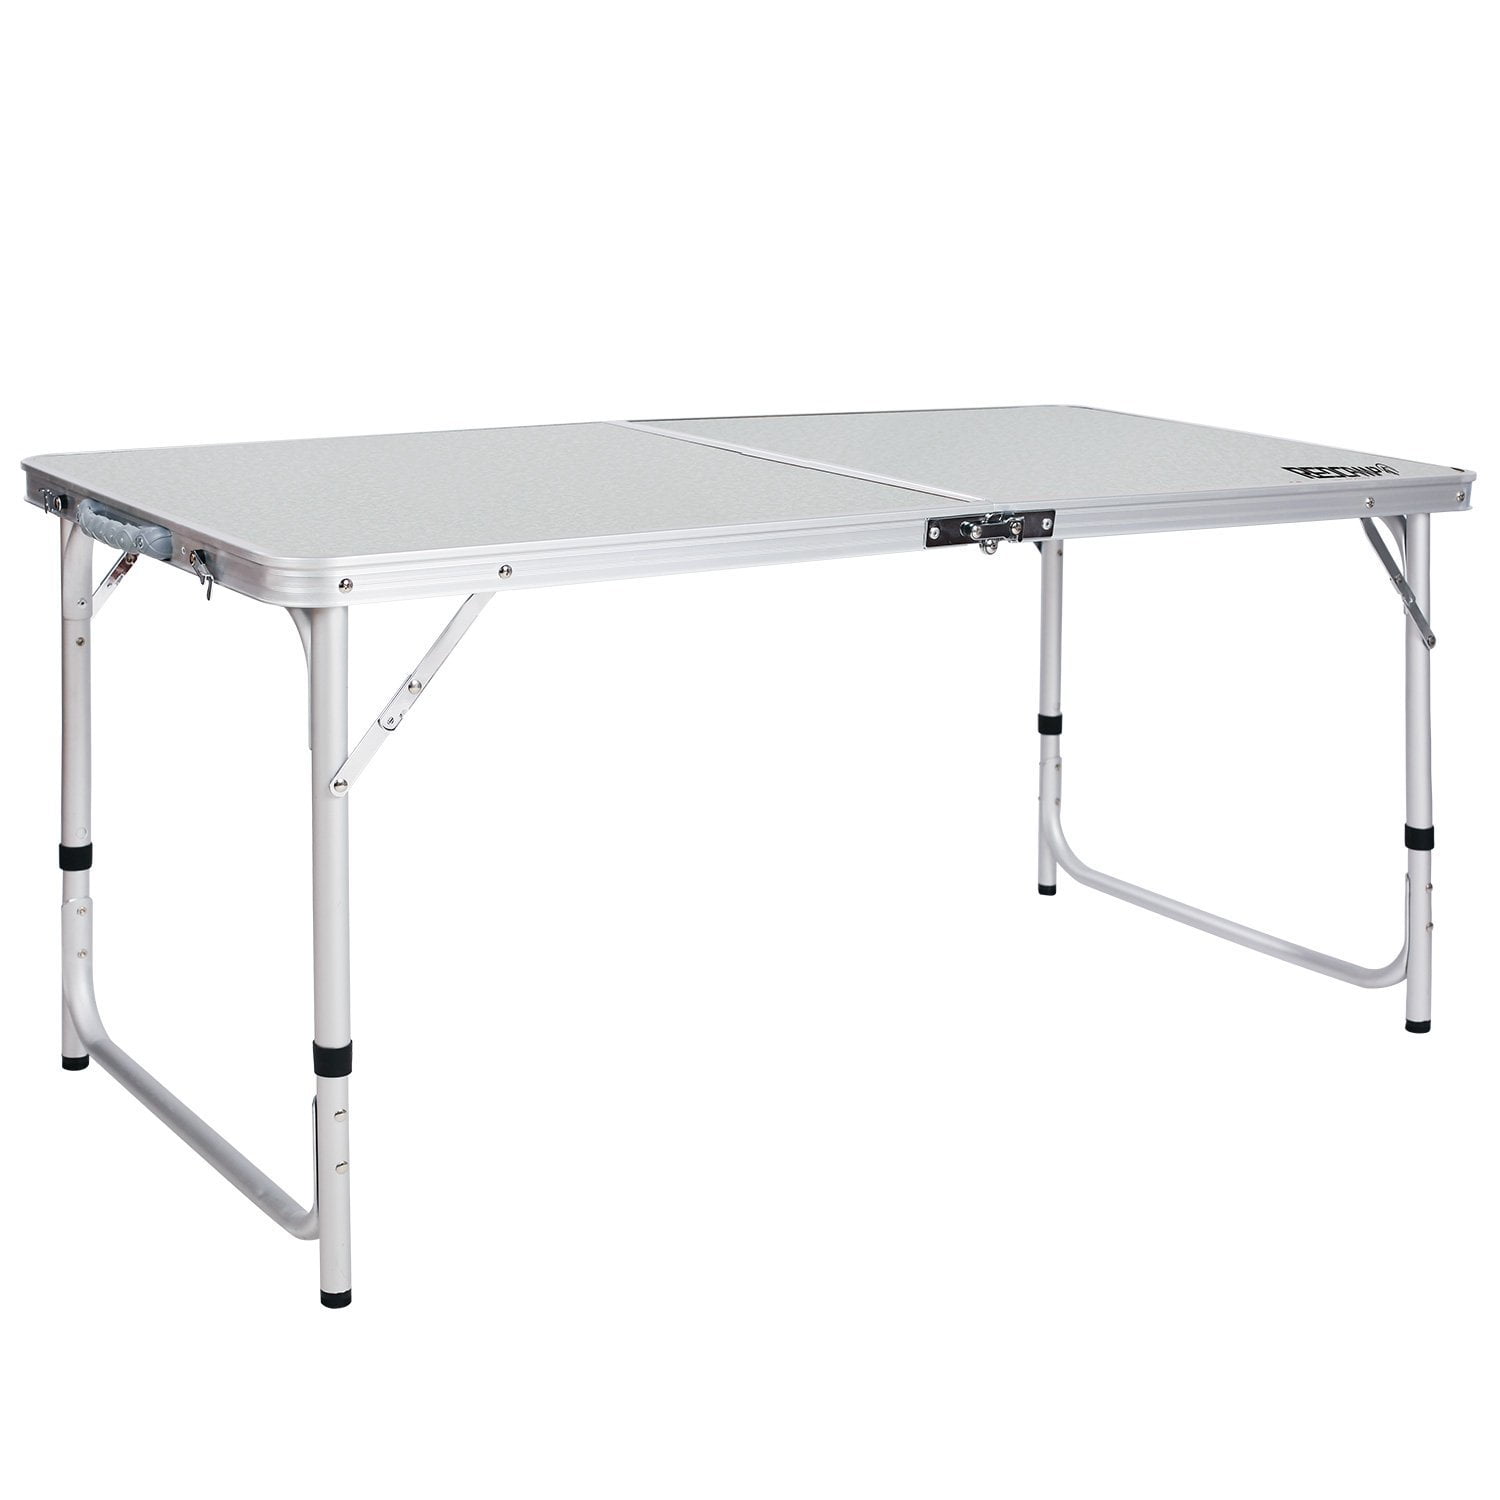 Low Profile Lightweight Resin Camping Table White 40 x 52 x 37cm Free Shipping 